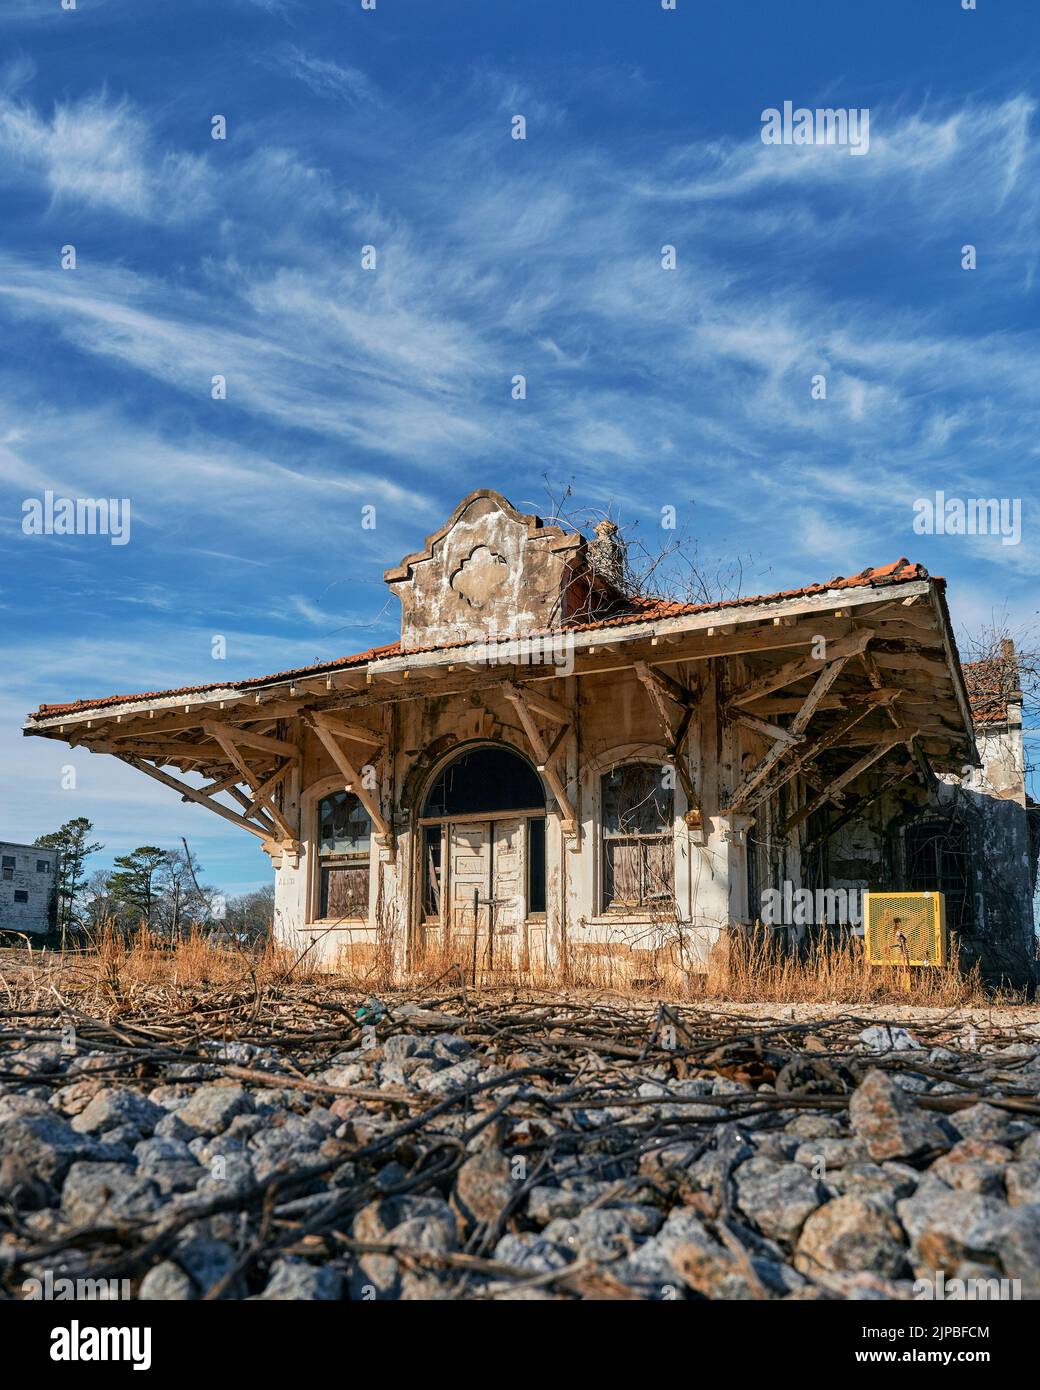 Wadley Alabama, USA, vintage train depot, a Mission Revival architecture train station is now abandoned. Stock Photo